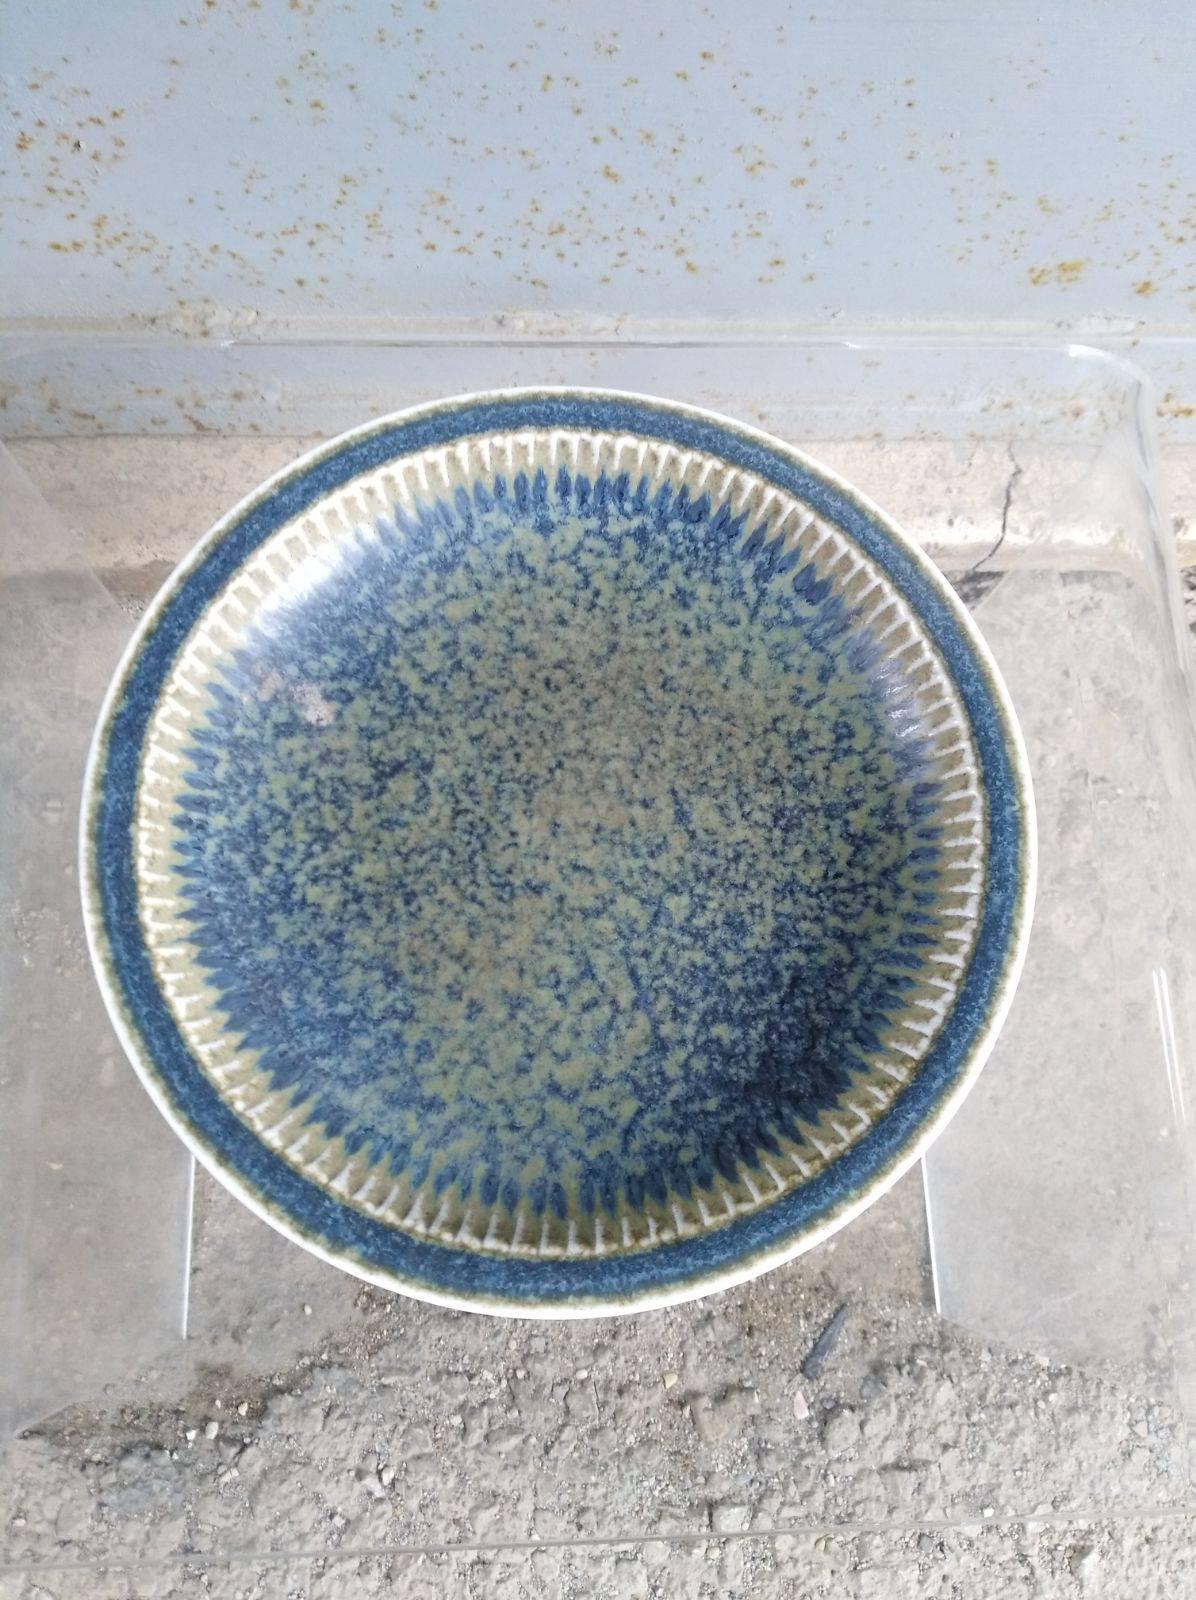 The glaze is very beautiful in the colors of blue harzefur.
Signed with the R with Three Crowns for Rörstrand, Carl-Harry Stalhane, Sweden and SGX for the model of the bowl.